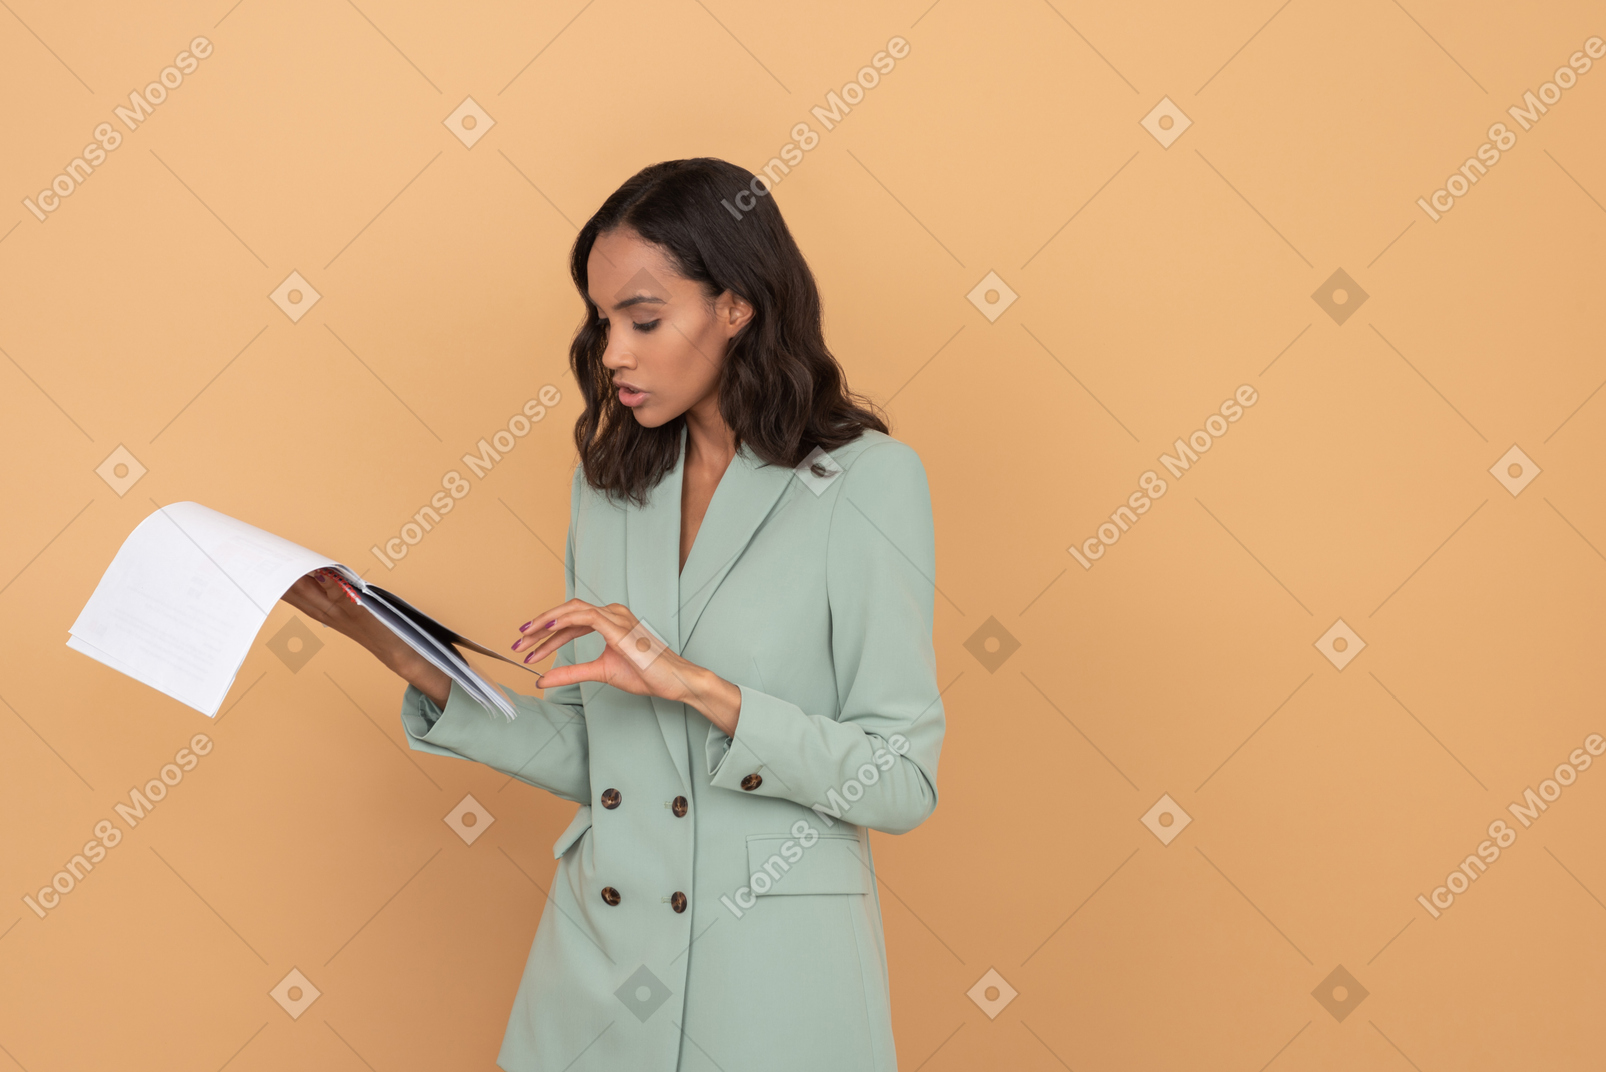 Attractive office worker reading some file